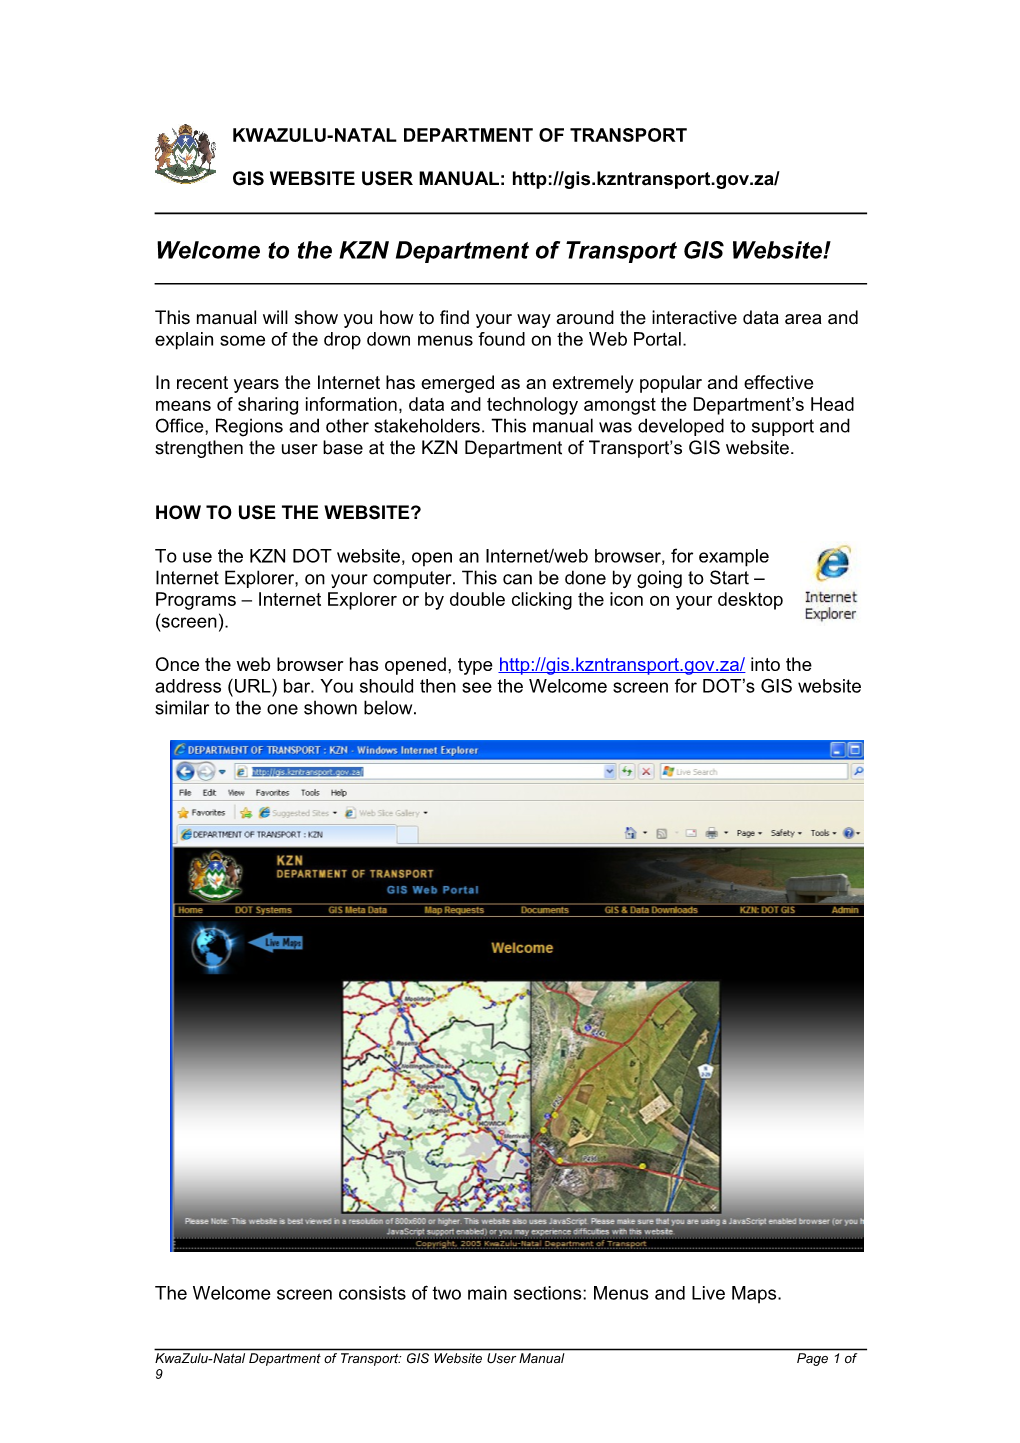 Welcome to the KZN Department of Transport GIS Website!